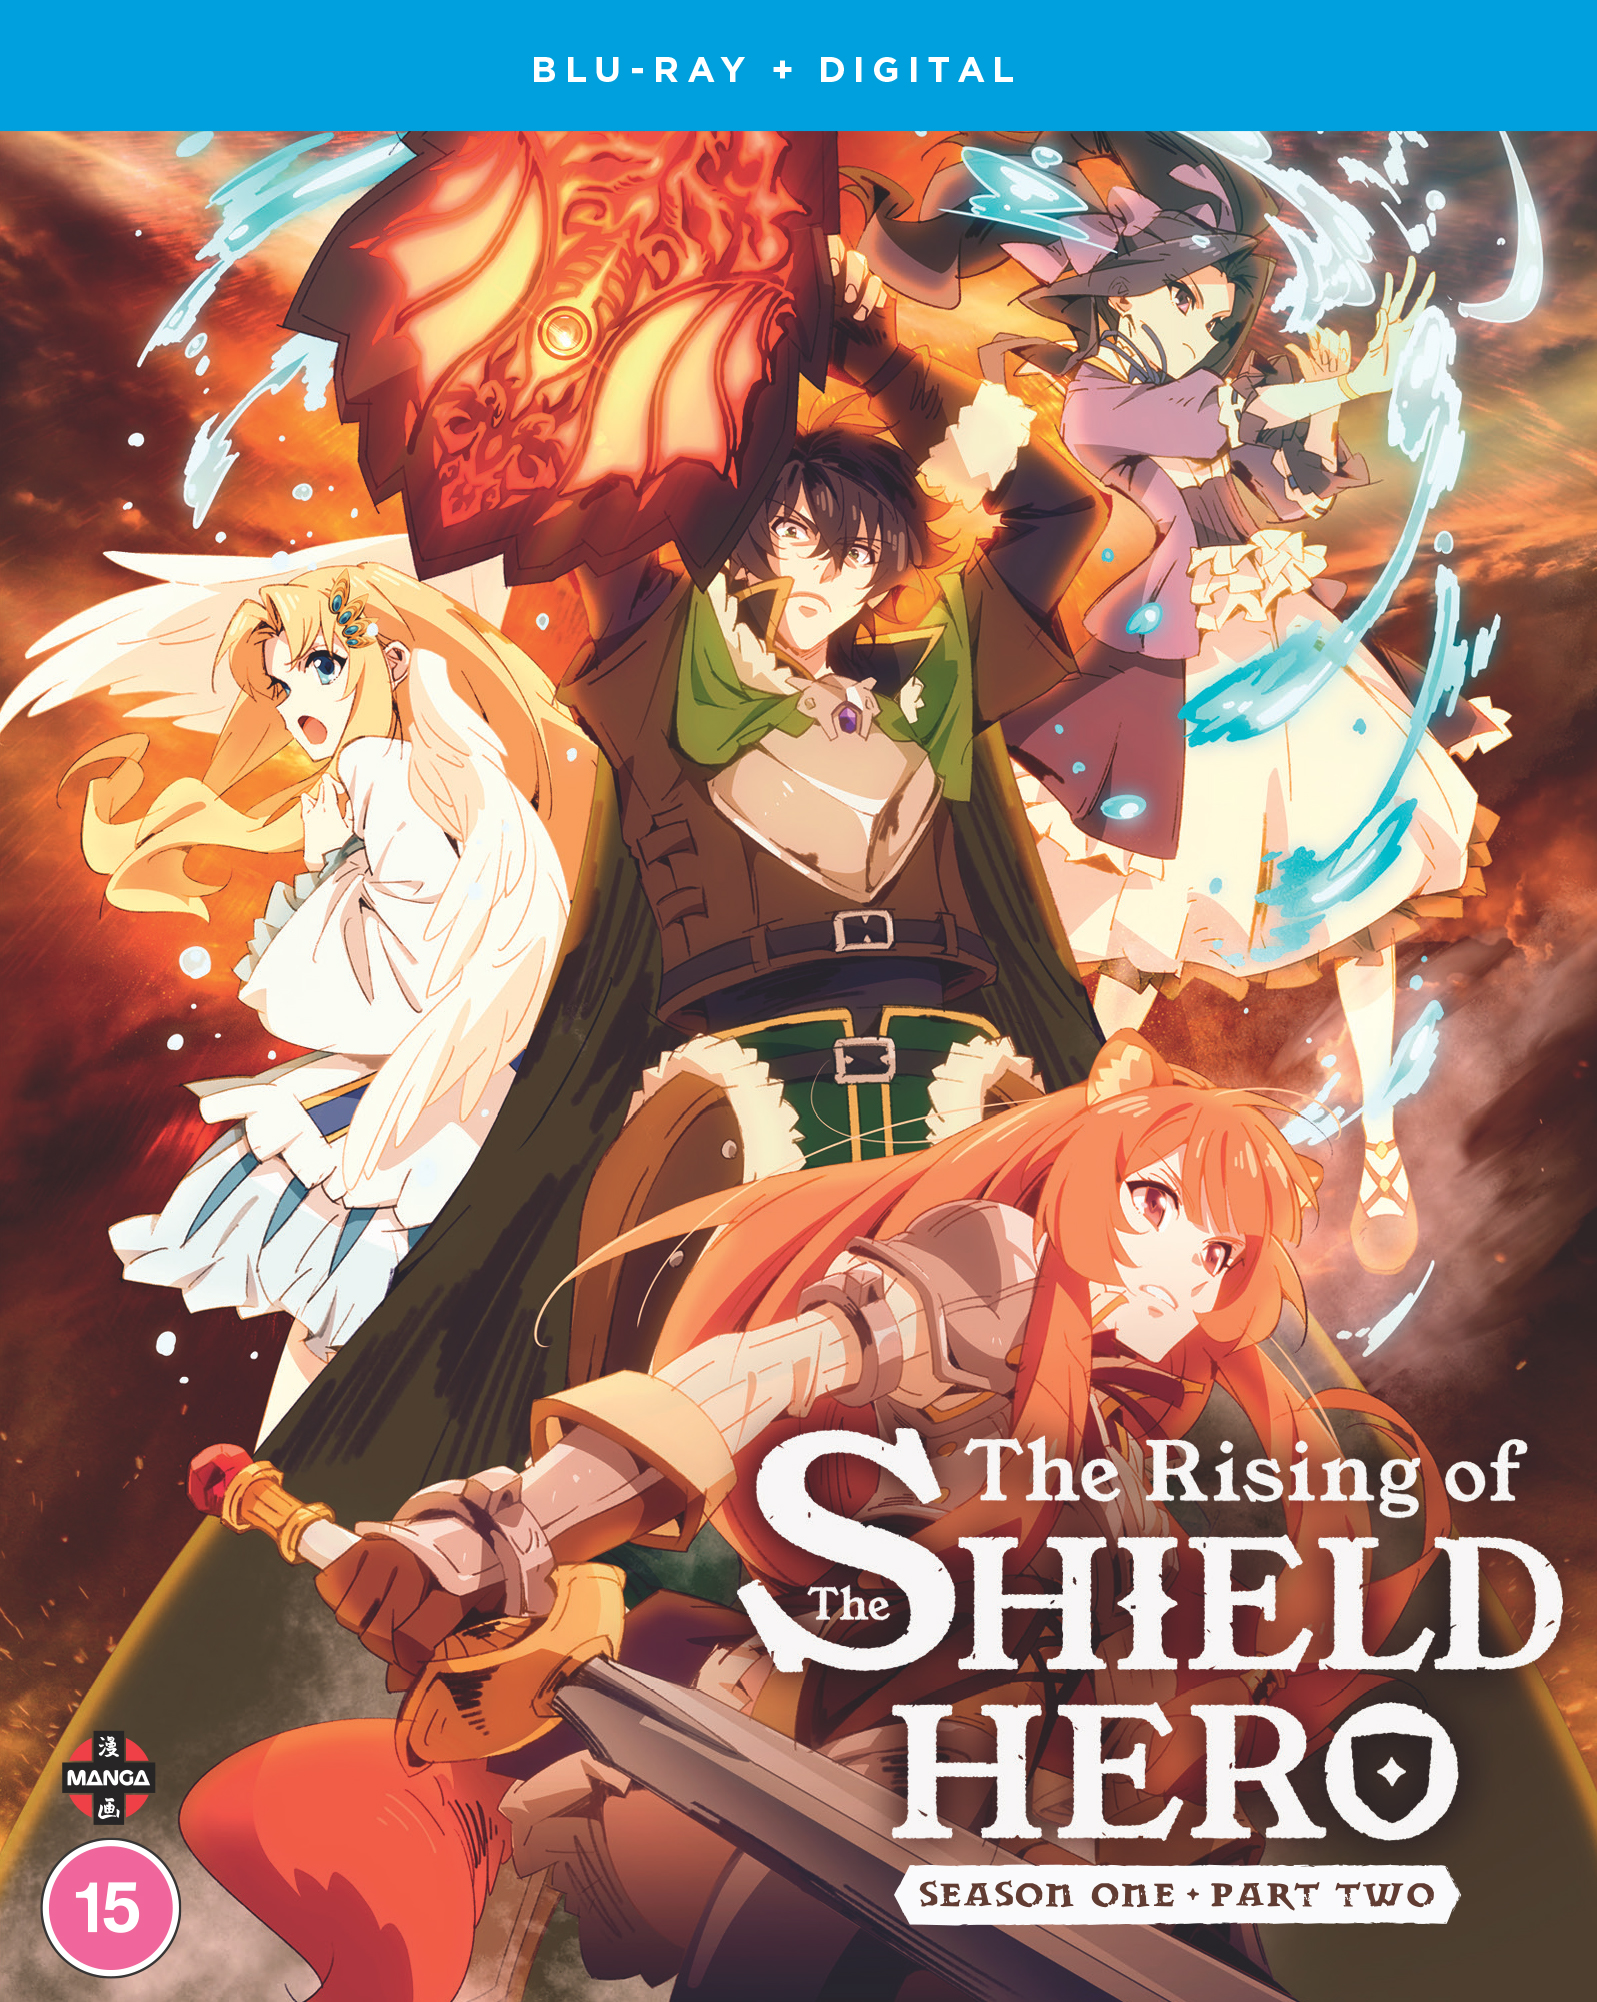 The Devil is in the Details: Ep 1 of Shield Hero vs Manga | Mistakes  Cheerio for Chesto